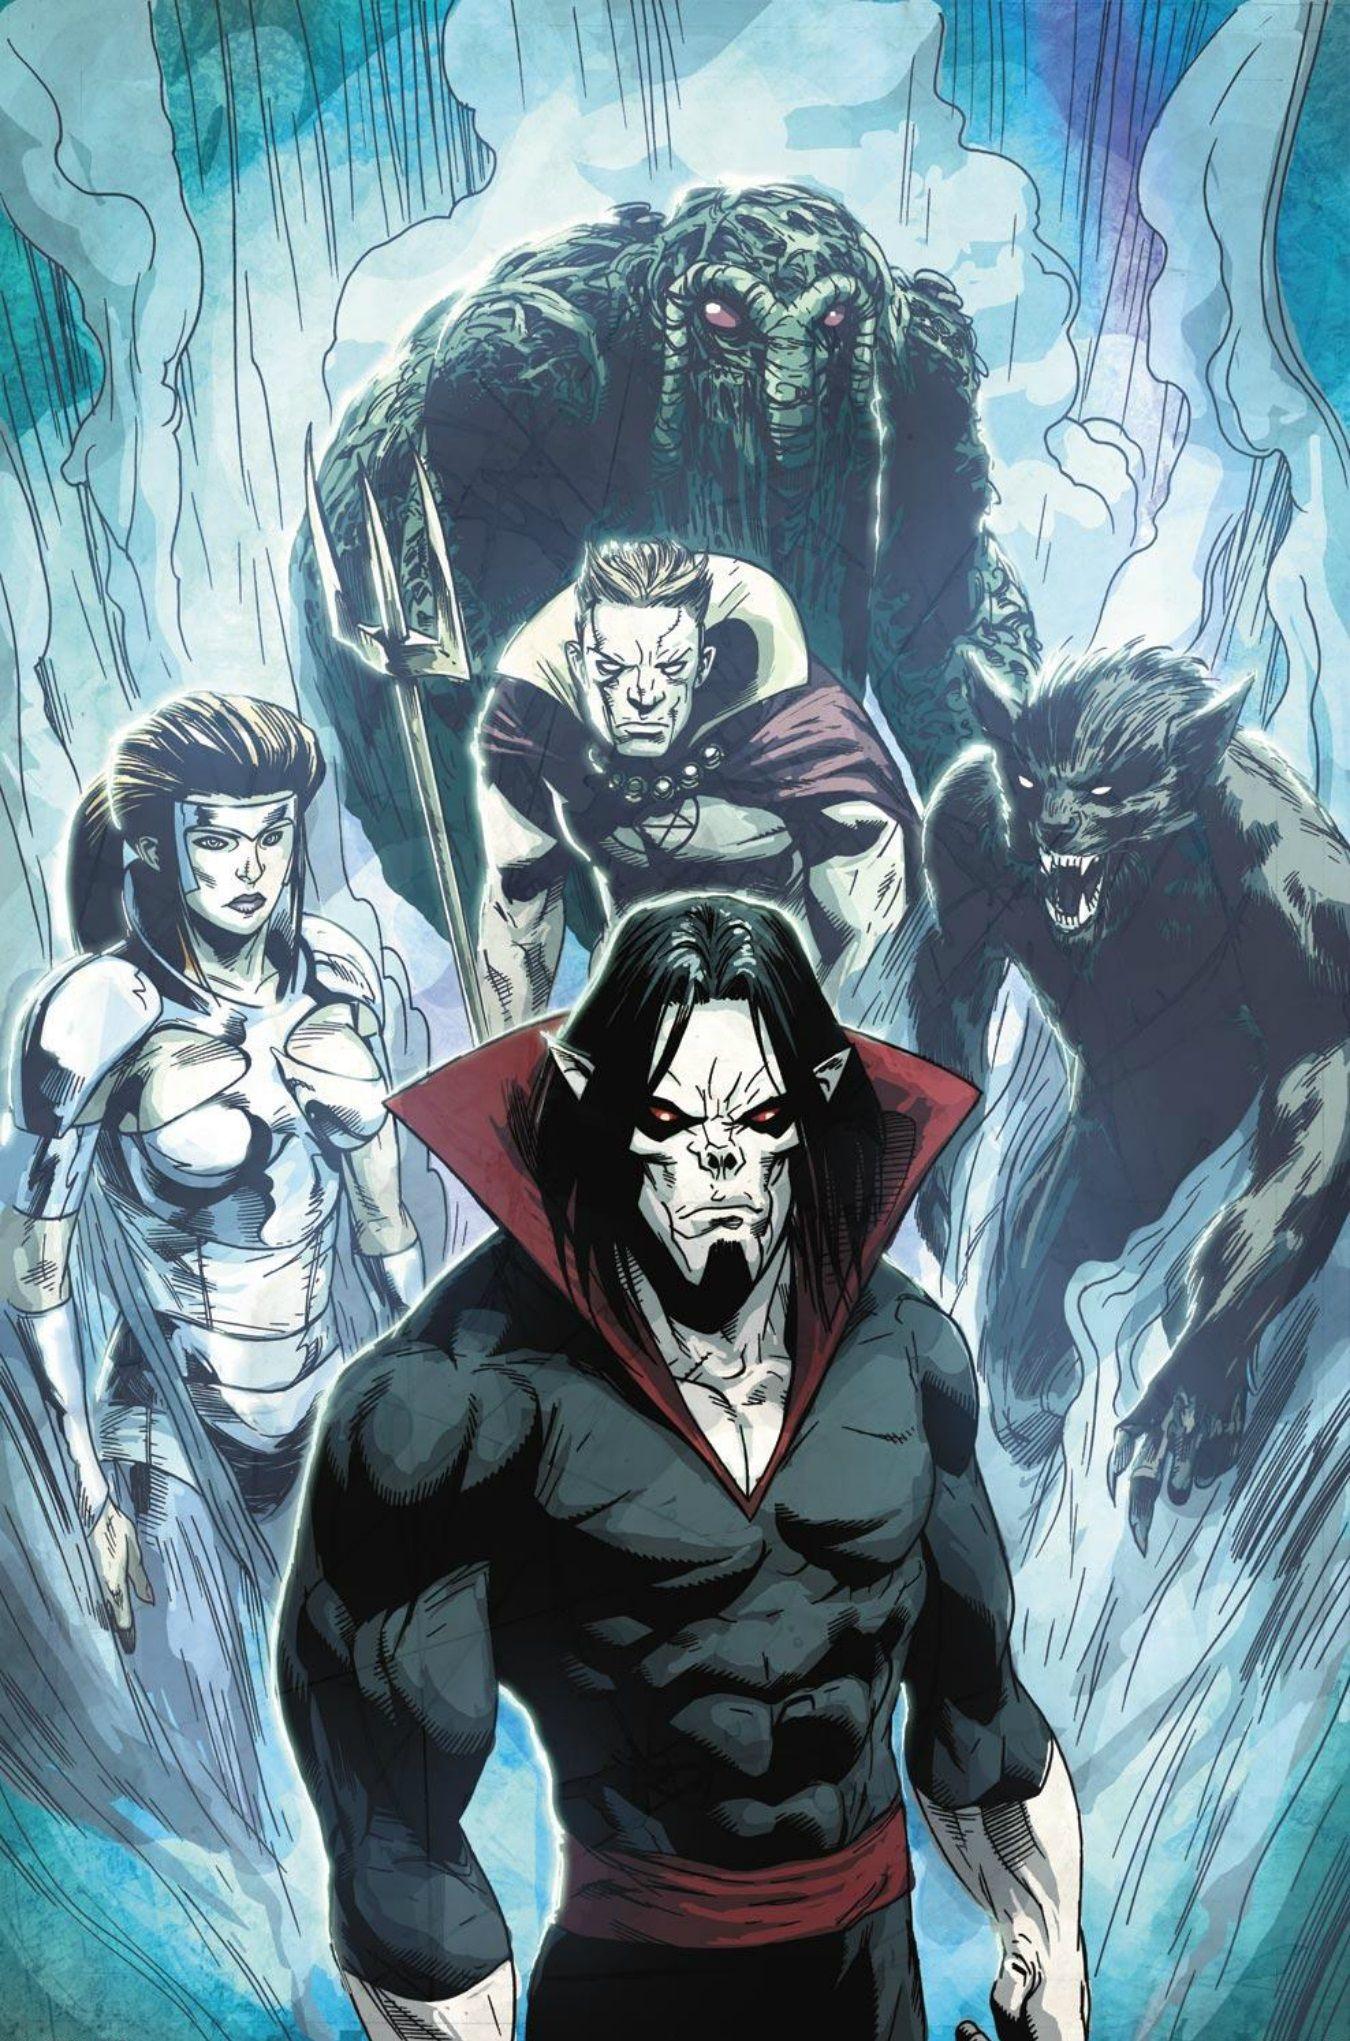 Morbius Wallpapers  Top Free Morbius Backgrounds  WallpaperAccess